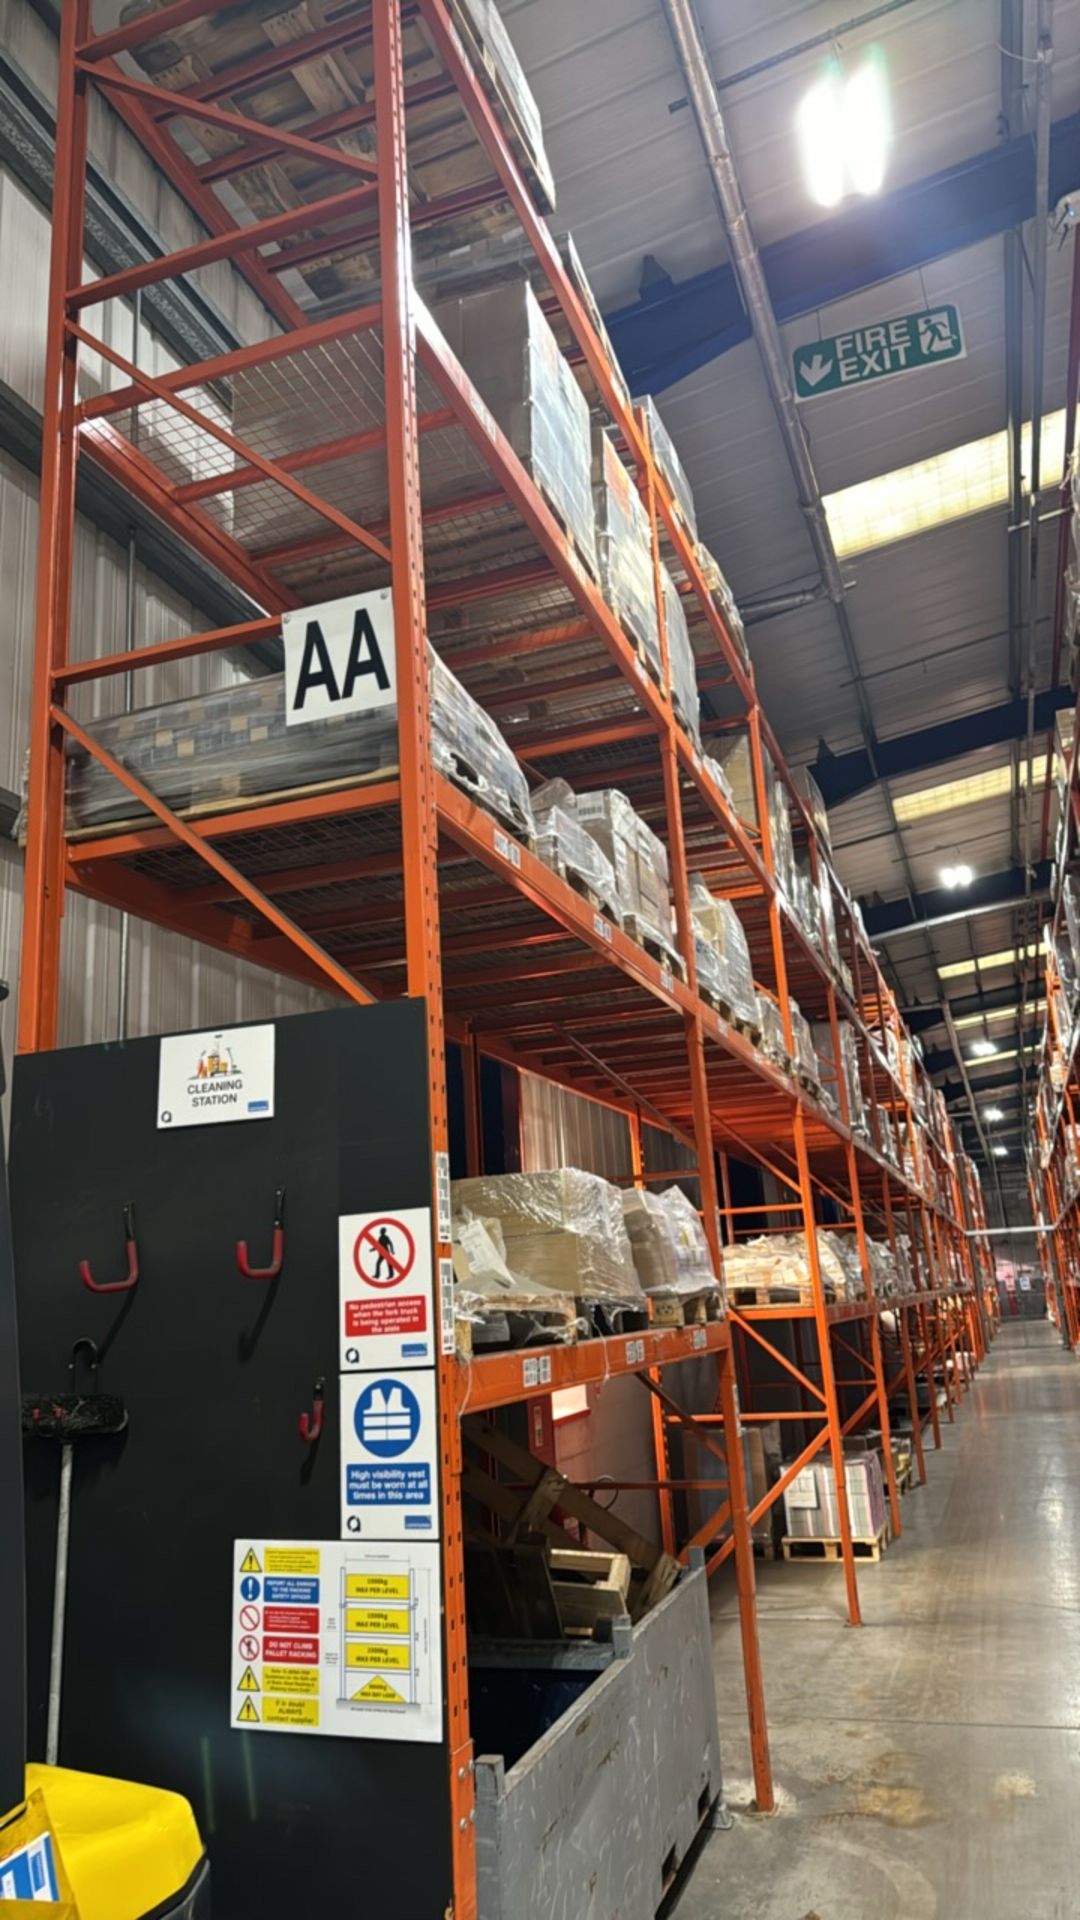 23 Bays Of Boltless Pallet Racking - Image 2 of 10